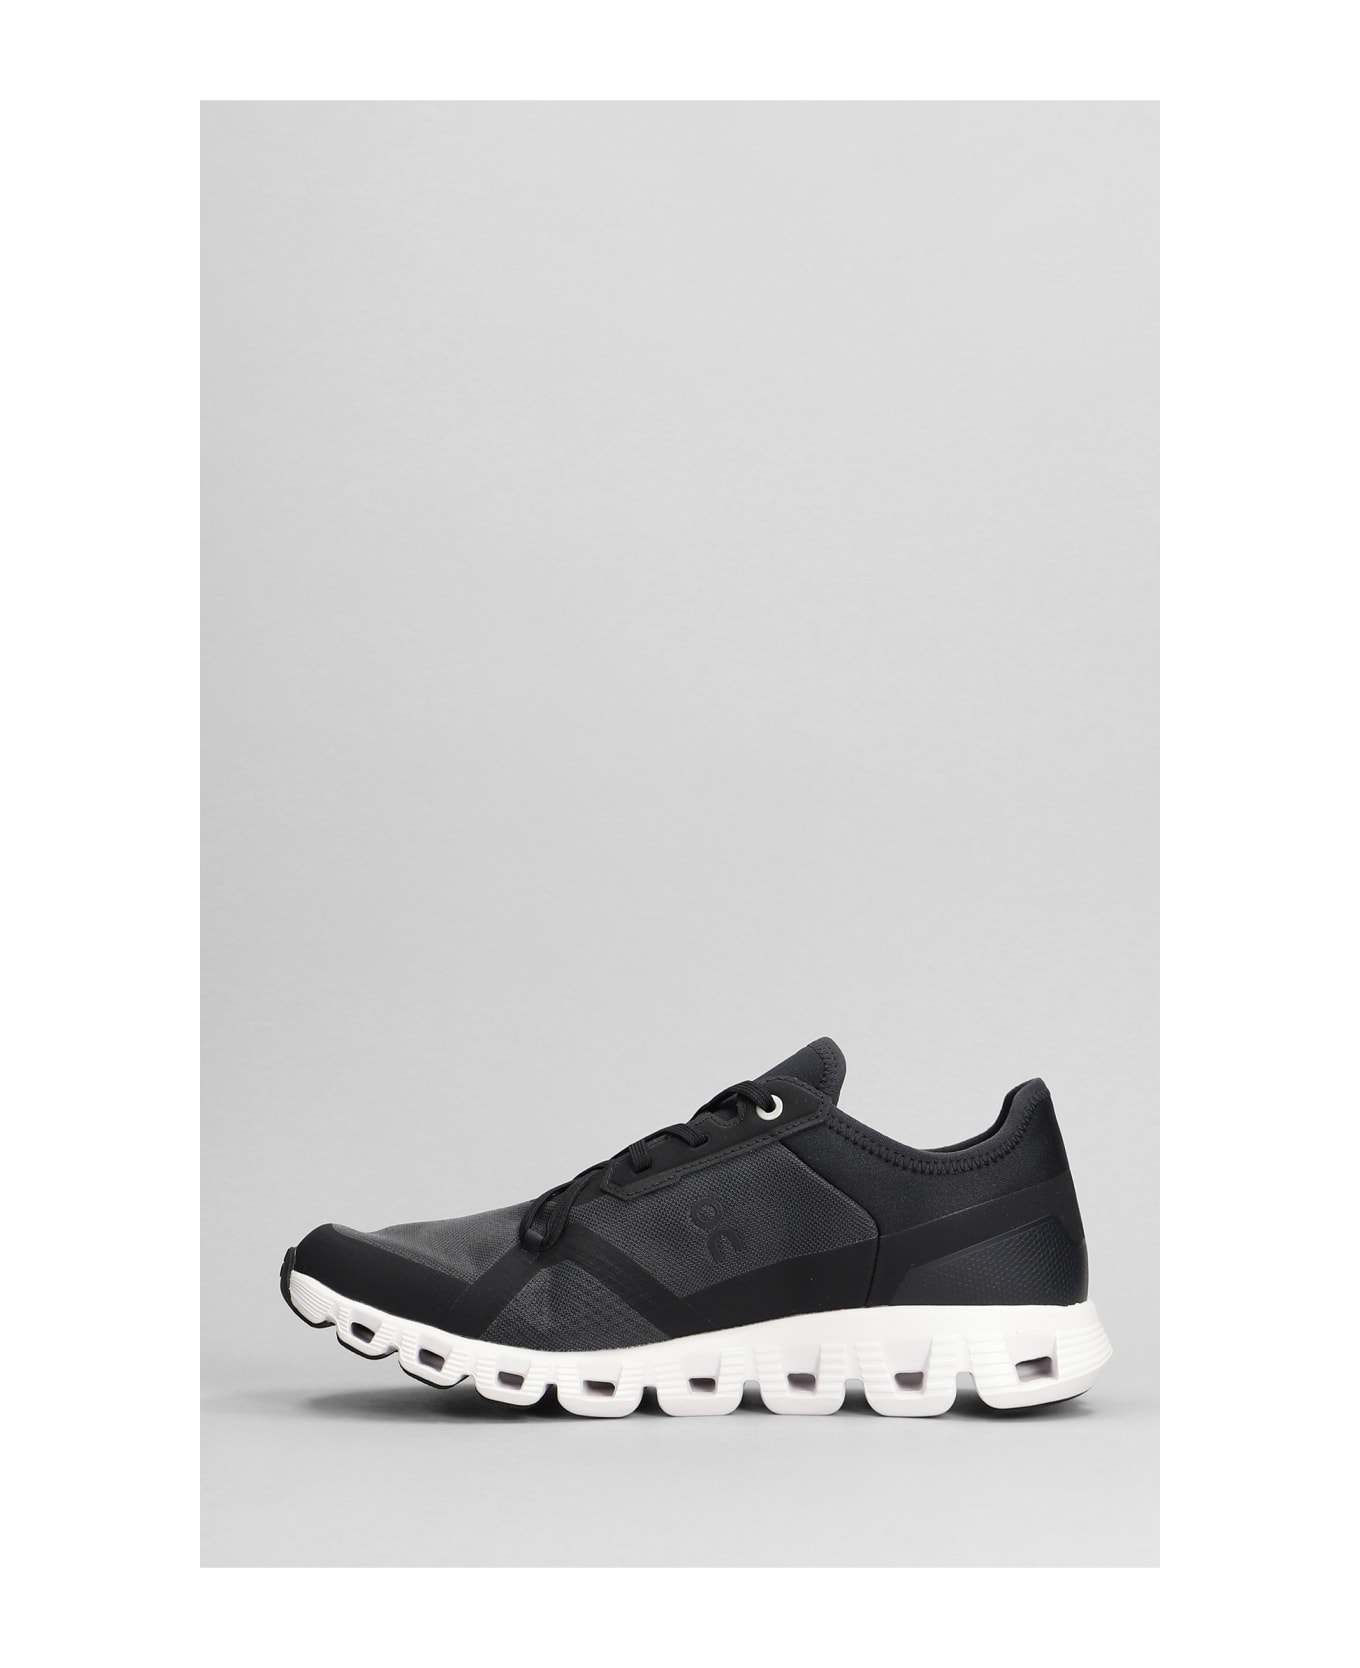 ON Cloud X 3 Ad Sneakers In Black Polyester - black スニーカー